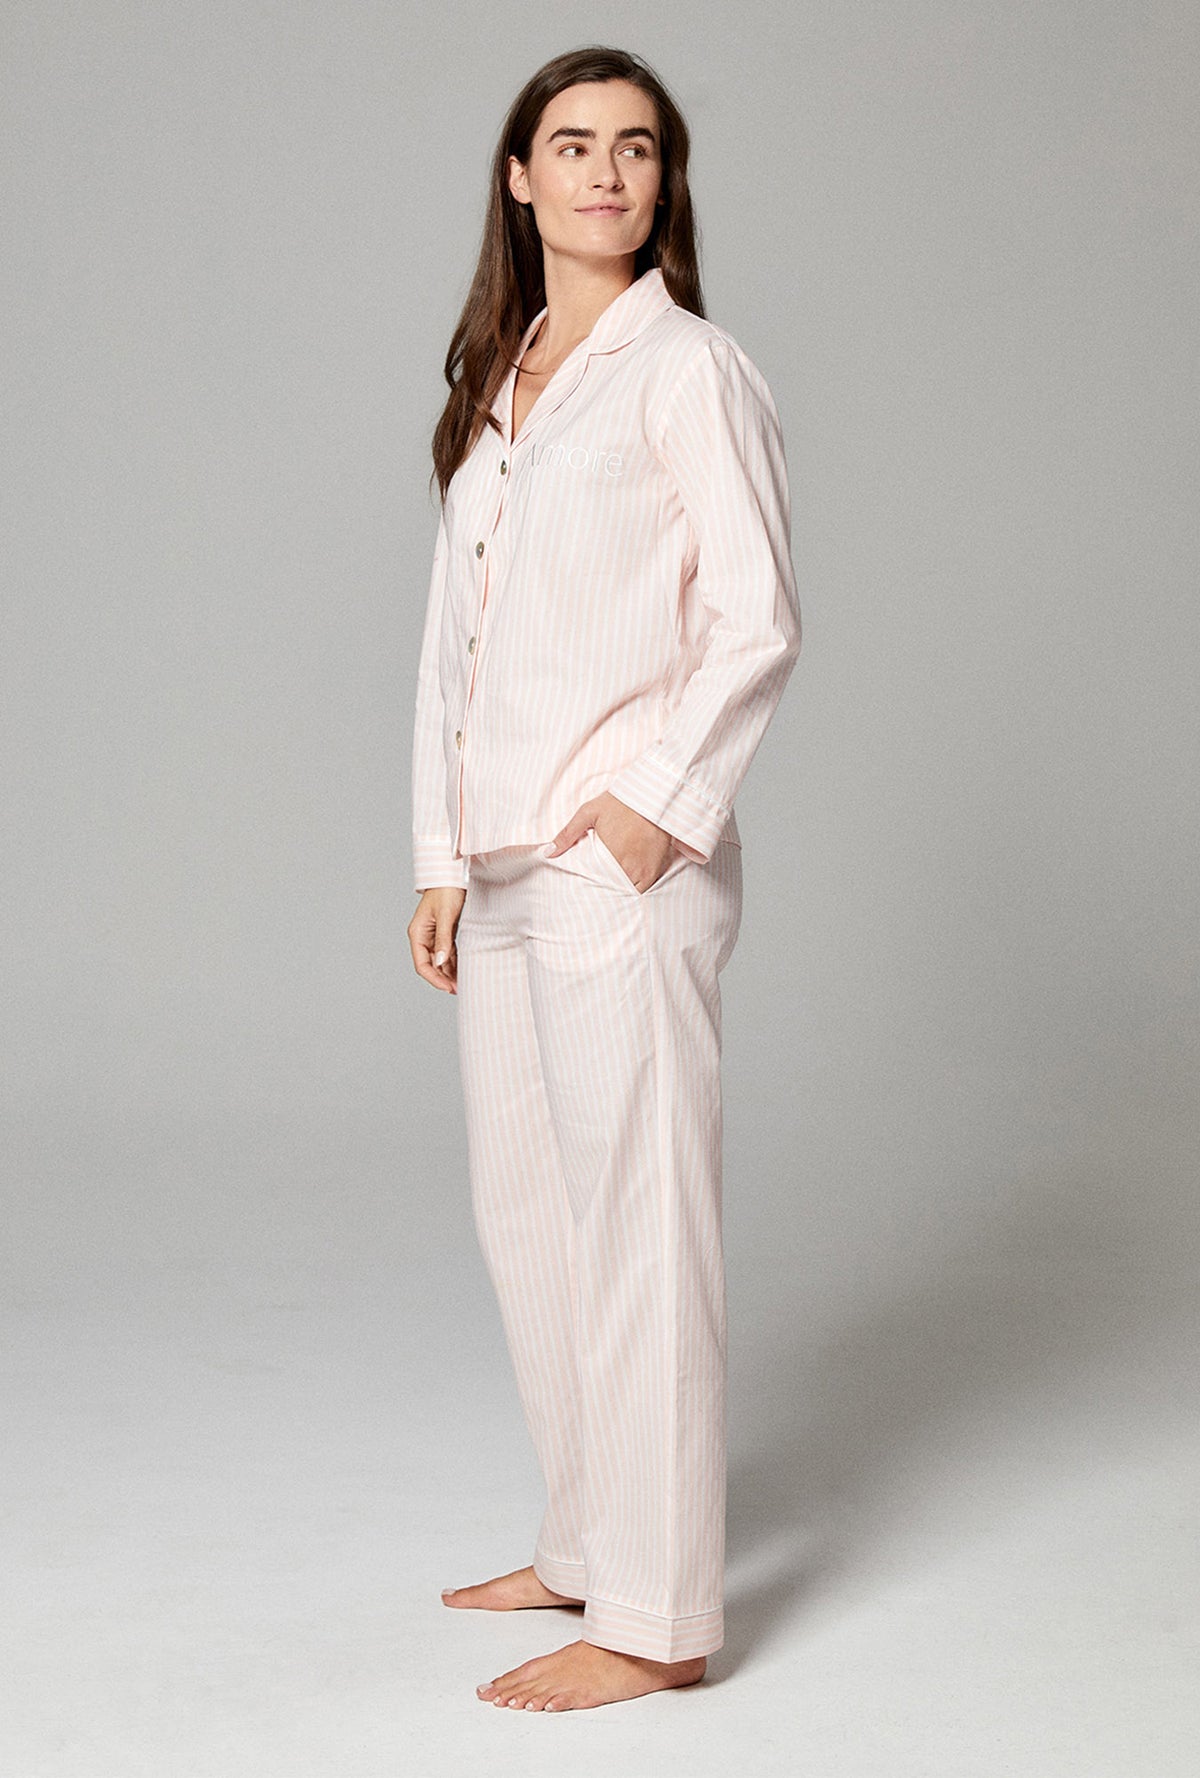 A lady wearing pink long sleeve classic pj set with stripes